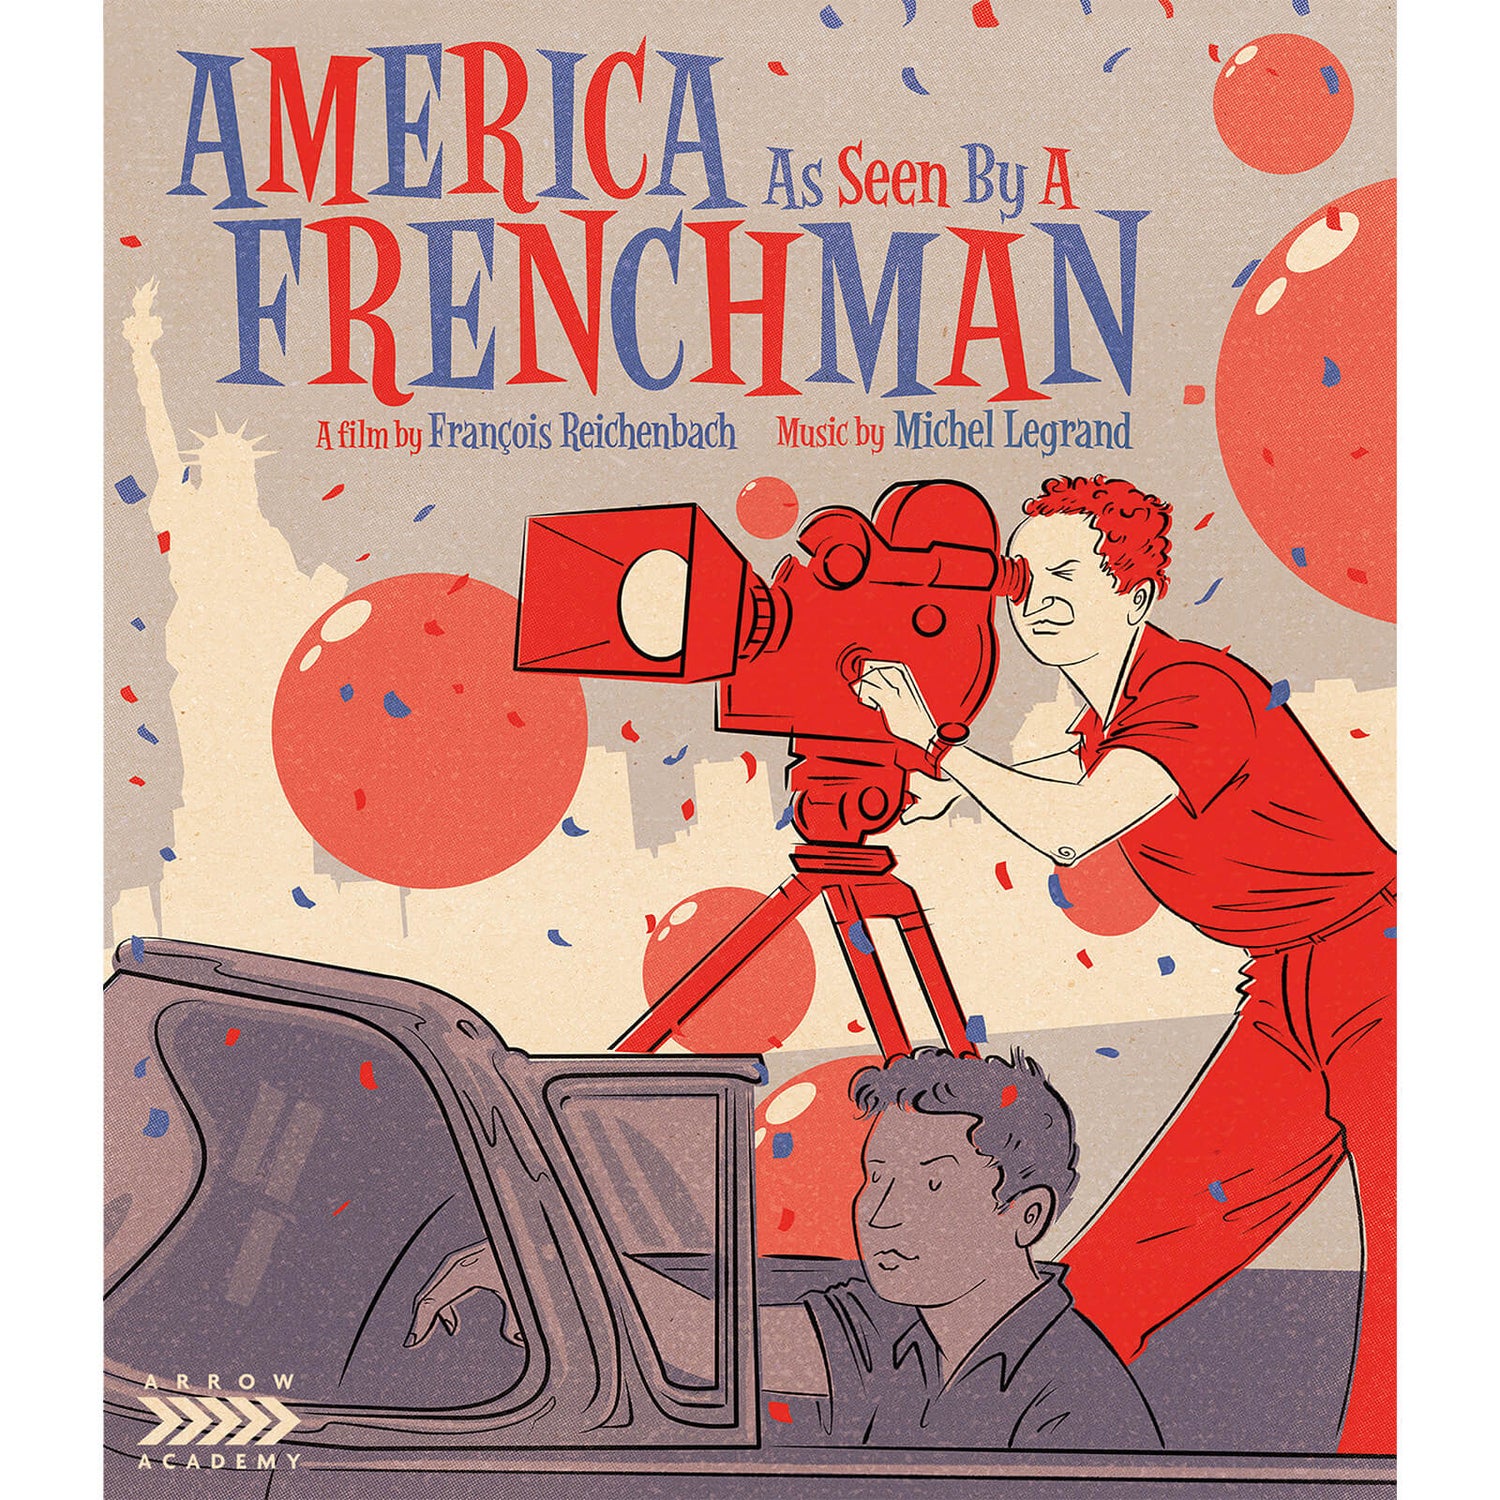 America As Seen By A Frenchman Blu-ray